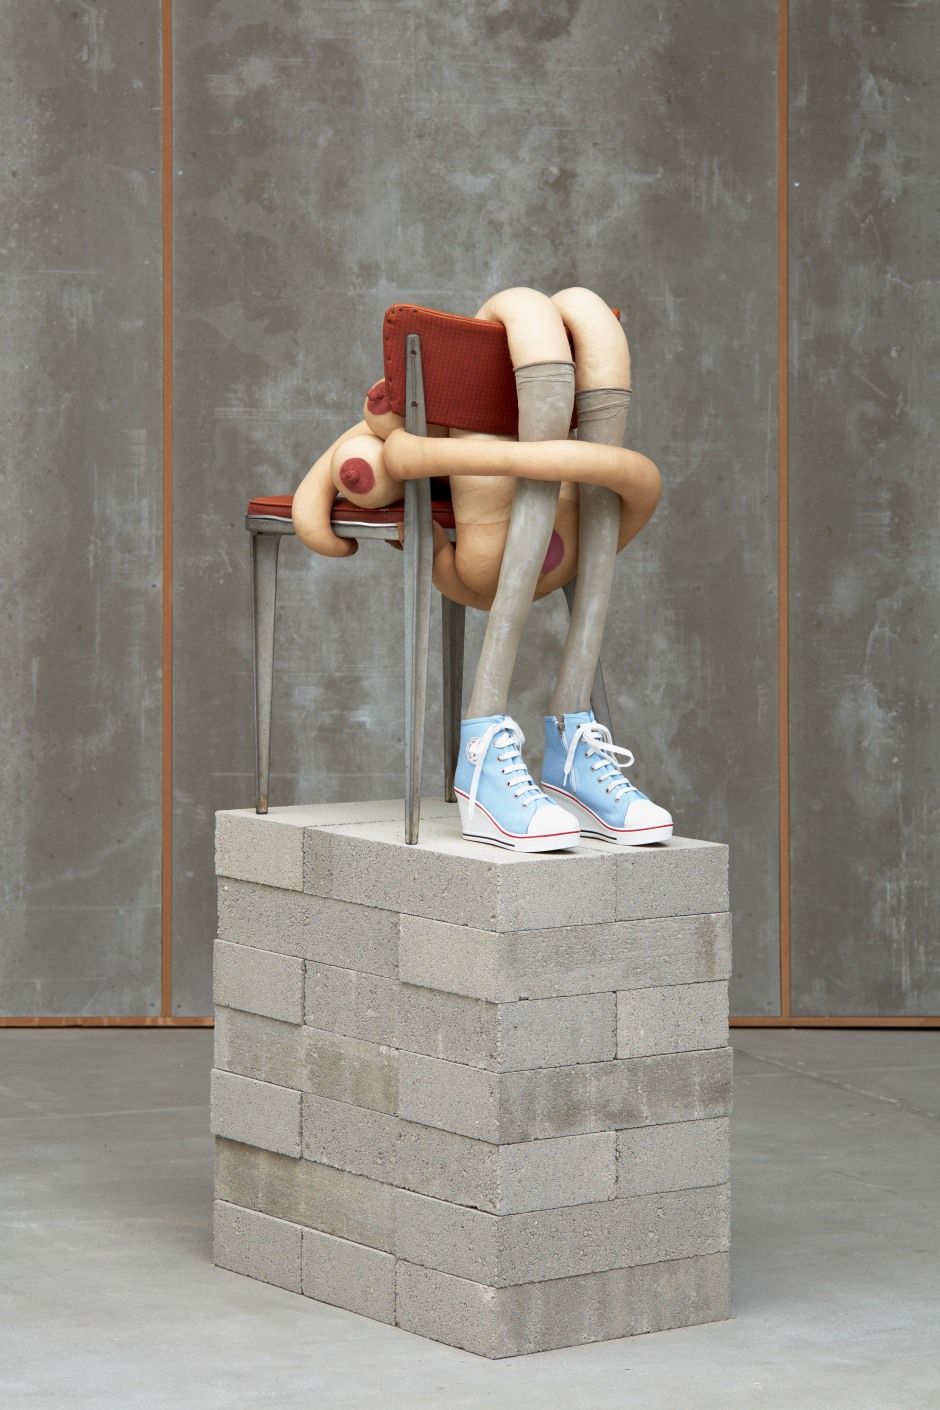 Sarah Lucas  PEEPING THOMASINA, 2020  tights, wire, wool, shoes, acrylic paint, vinyl and metal chair  sculpture: 81 x 46 x 66 cm / 31 ⅞ x 18 ⅛ x 26 in plinth: 68.1 x 43 x 65.2 cm / 26 ¾ x 16 ⅞ x 25 ⅝ in  © Sarah Lucas. Courtesy the Artist and Sadie Coles HQ, London.  Photo: Robert Glowacki